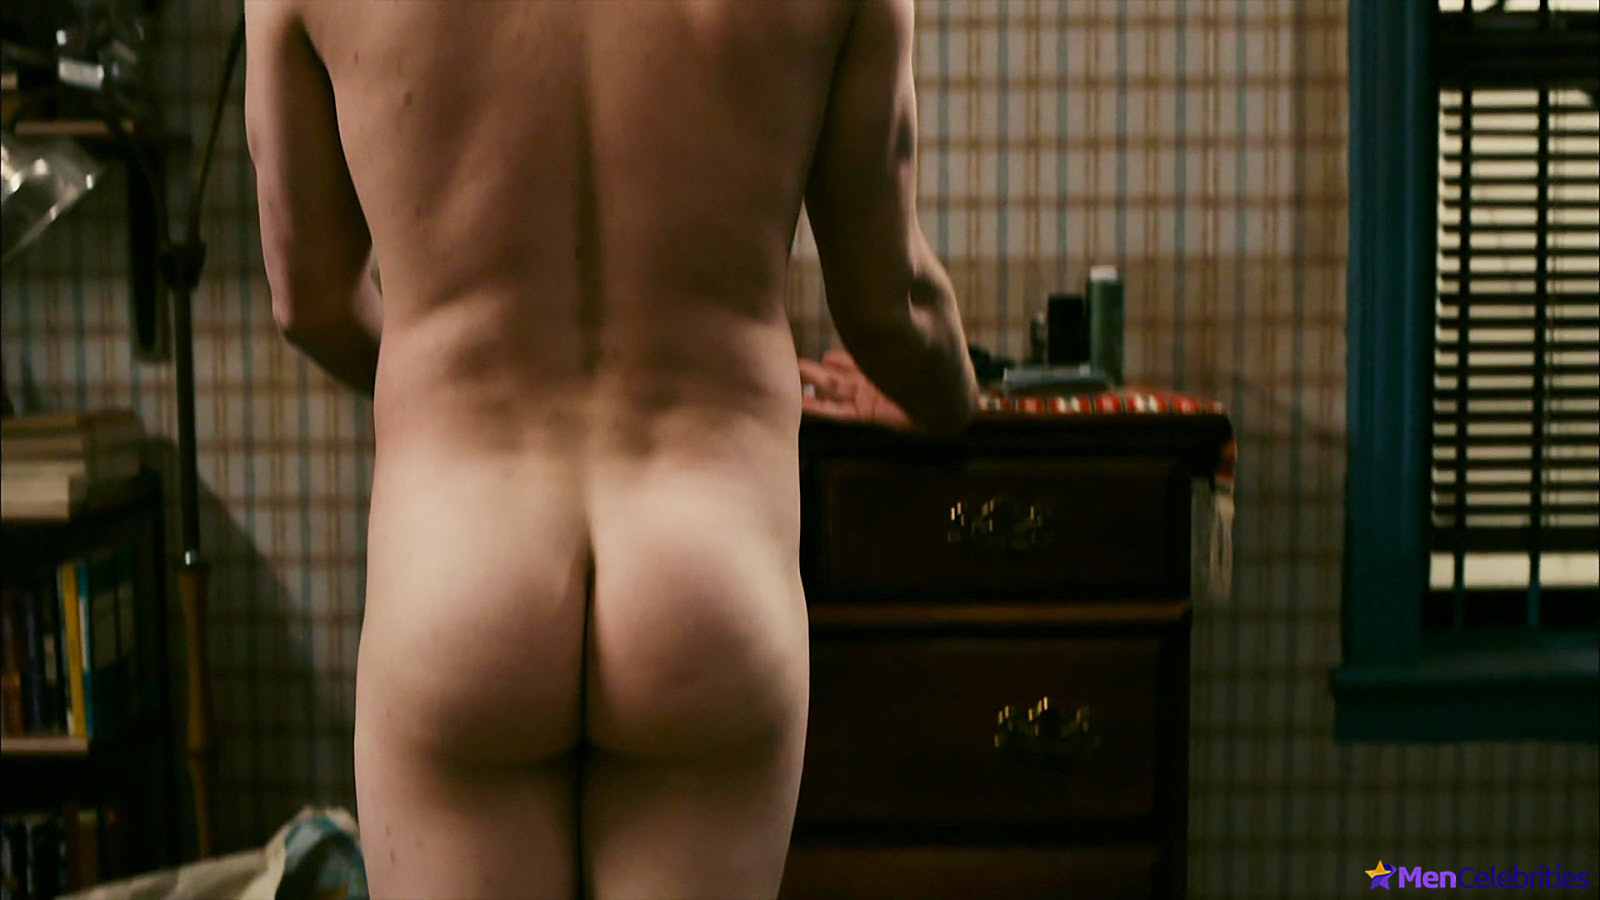 Well, Michael C. Hall feels confident enough to do nude movie scenes. 